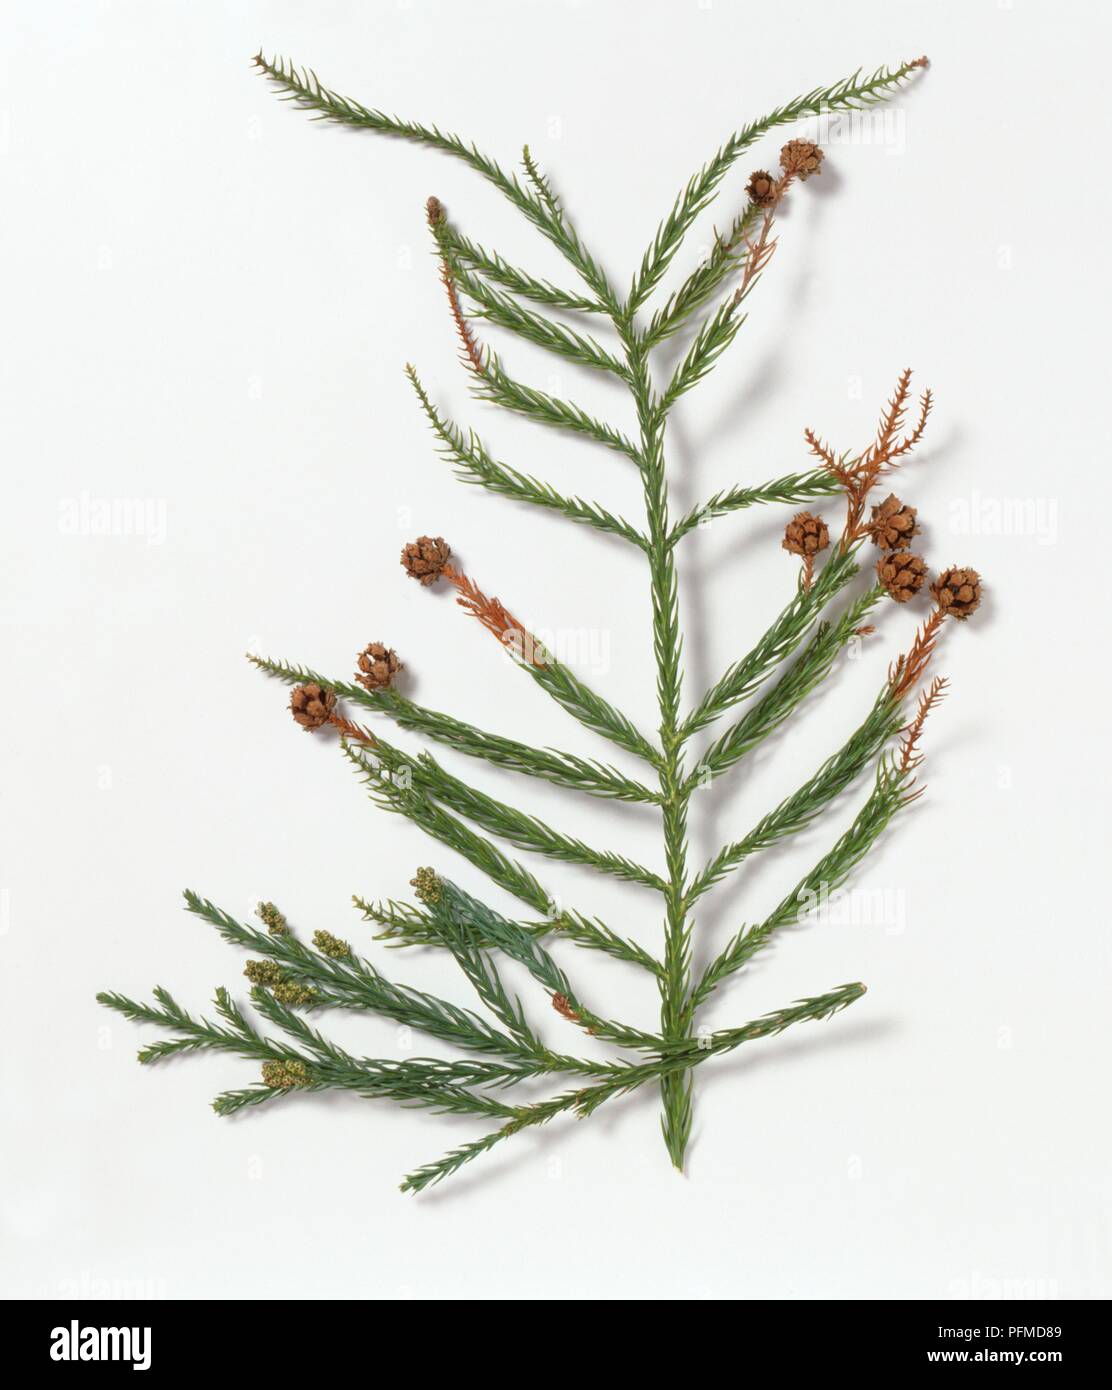 Cryptomeria japonica (Japanese cedar), branch with leaves, cones and female flower clusters Stock Photo